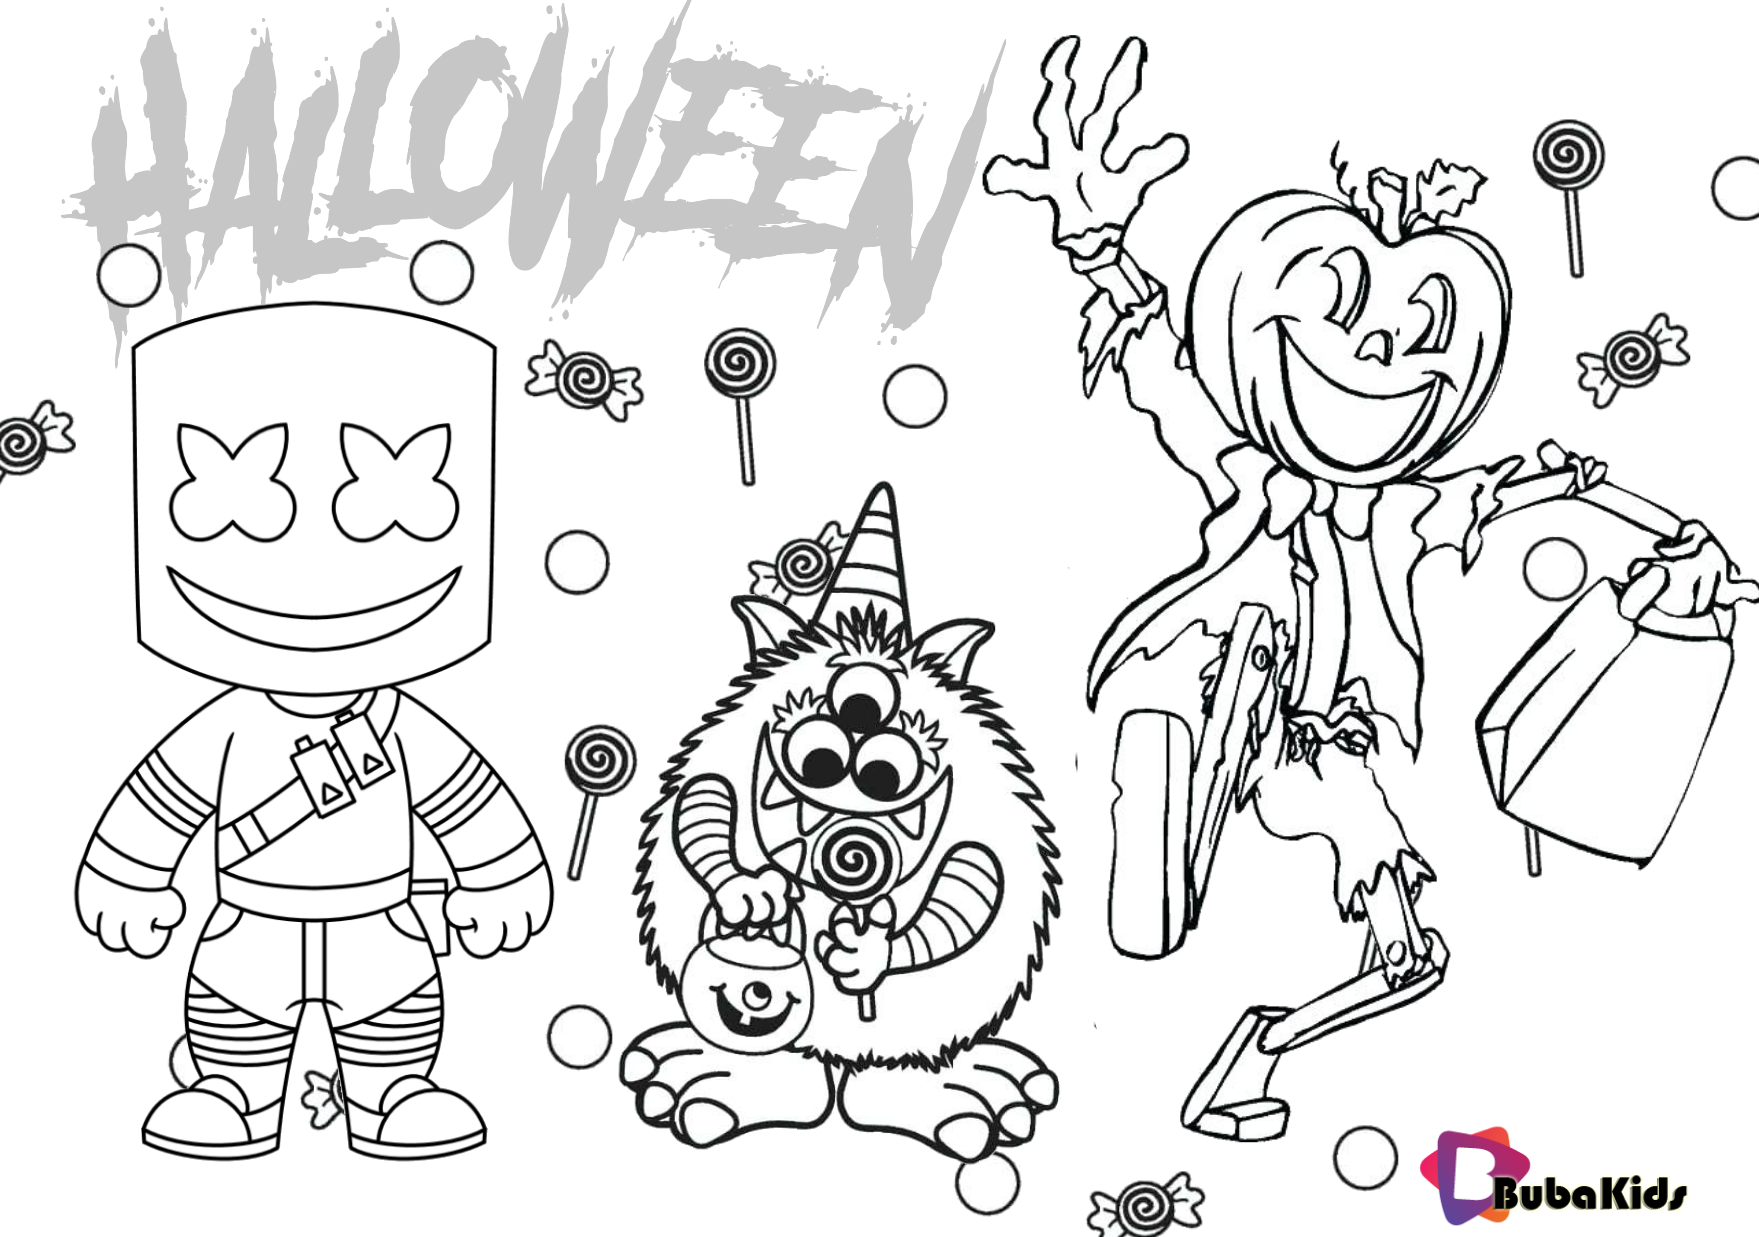 Marshmello, candy monster and jack o lantern costume ideas for halloween party coloring page. Wallpaper